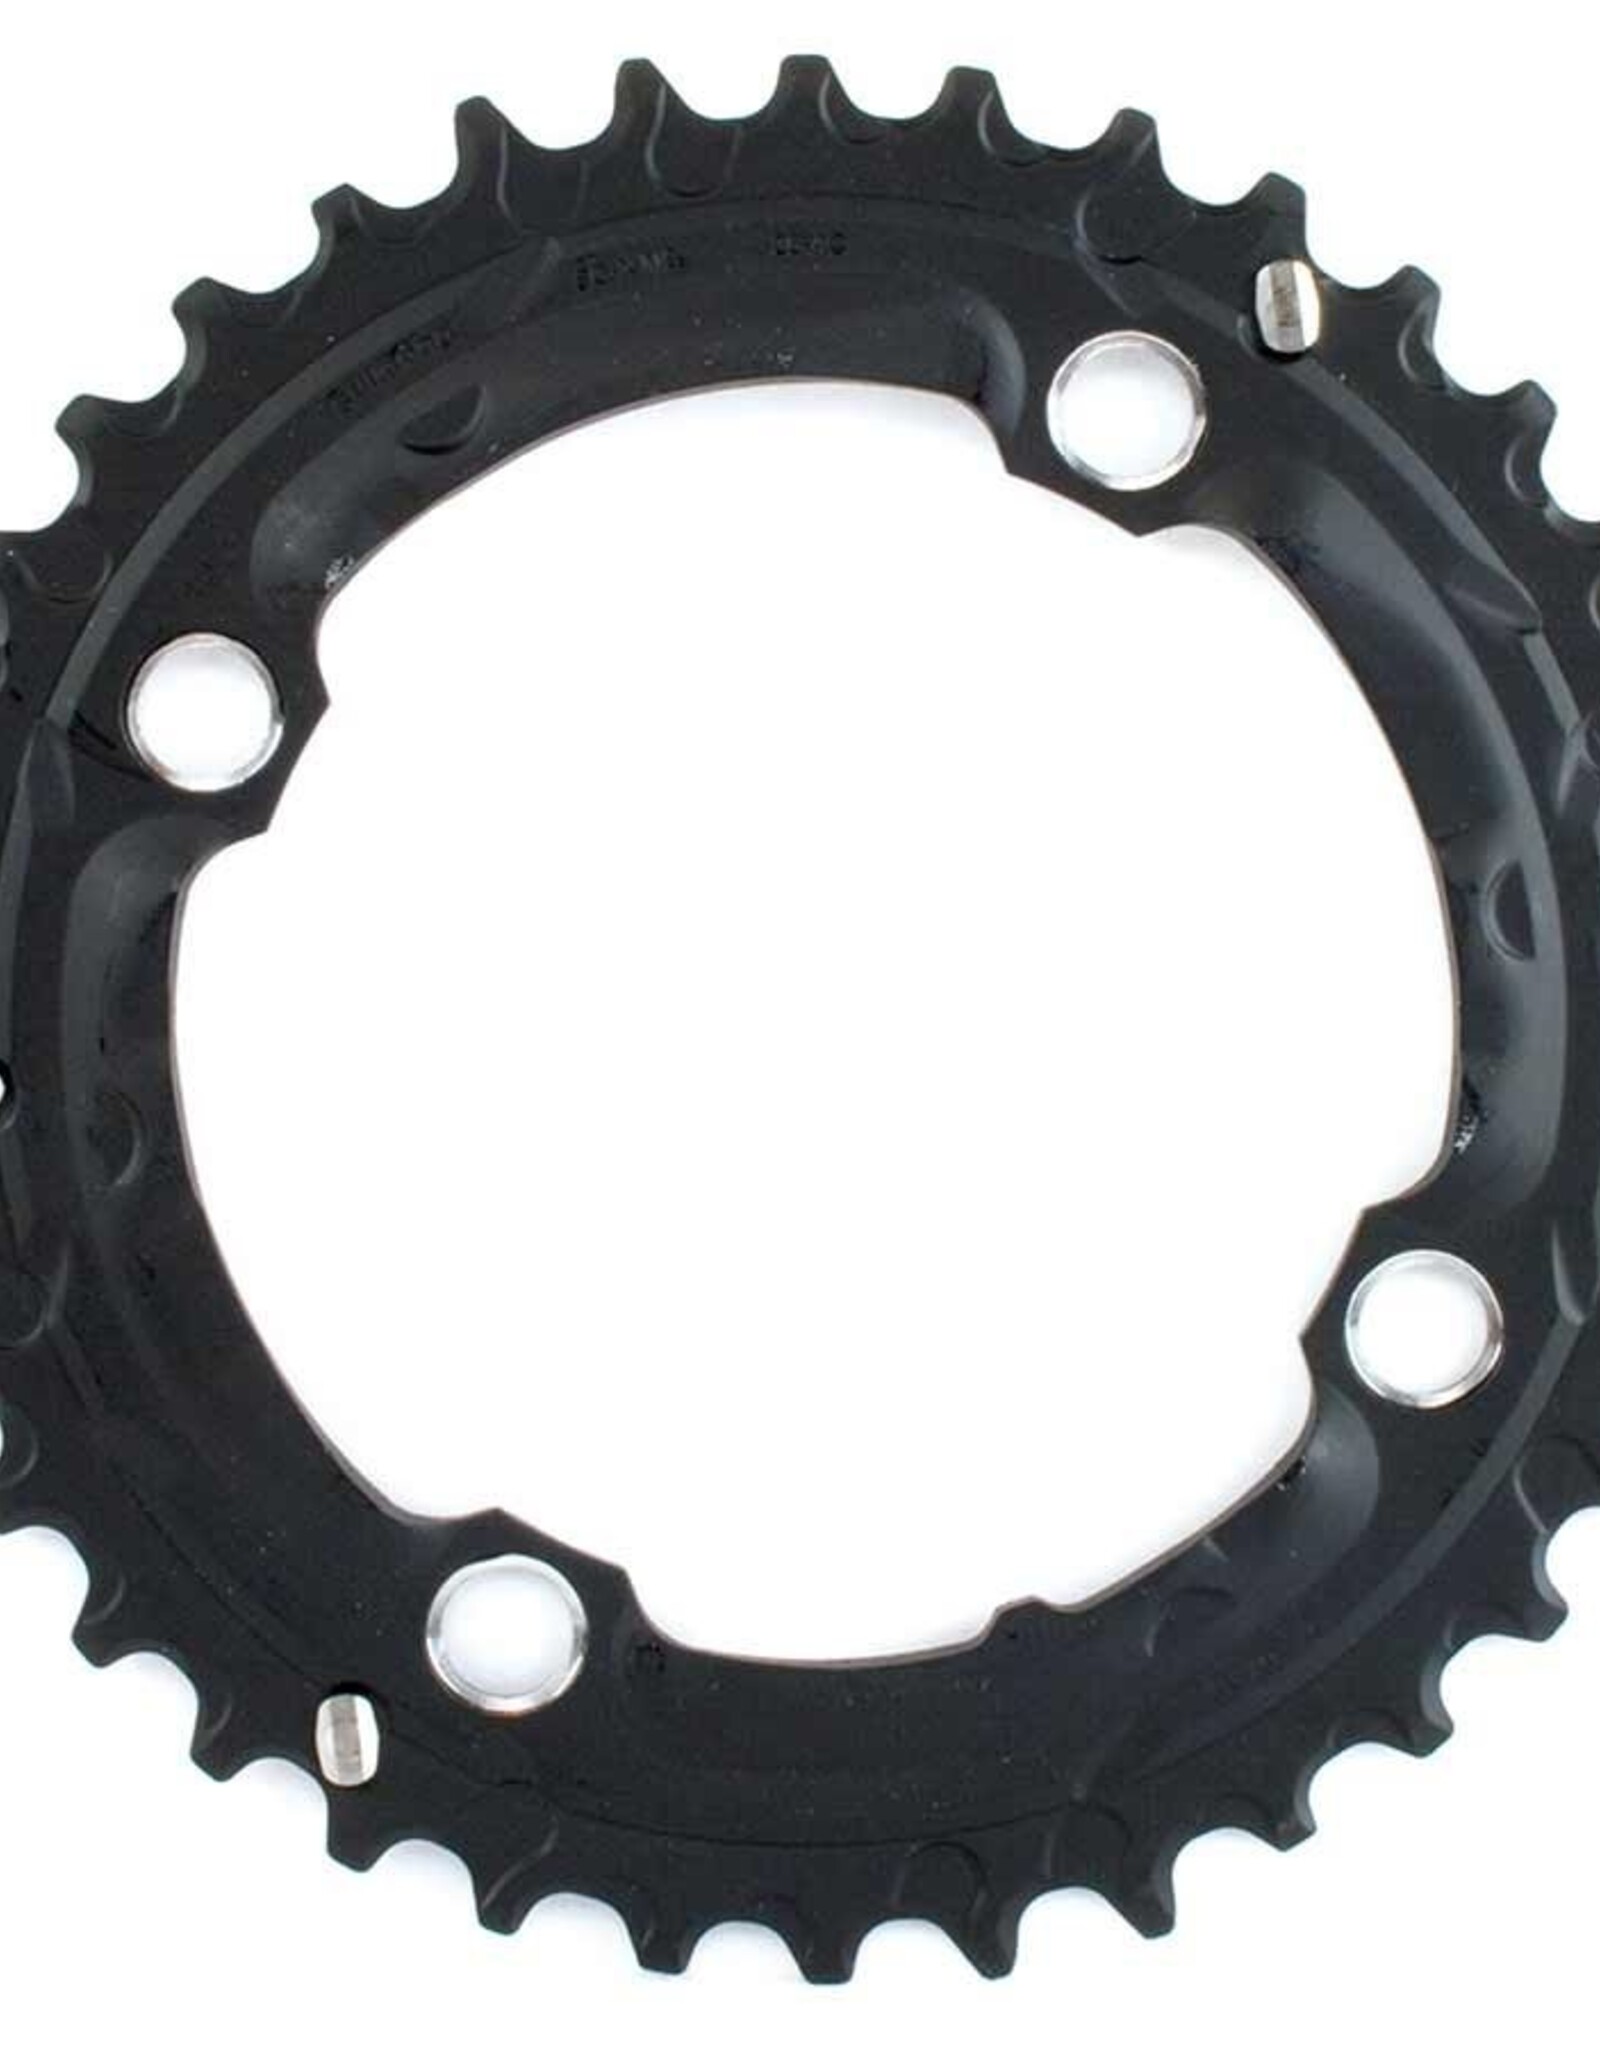 Shimano Shimano, Y1KG98050, 36T, 9sp, BCD: 104mm, 4 Bolt, SLX FC-M665, Outer Chainring, For 22/36, Aluminum, Black